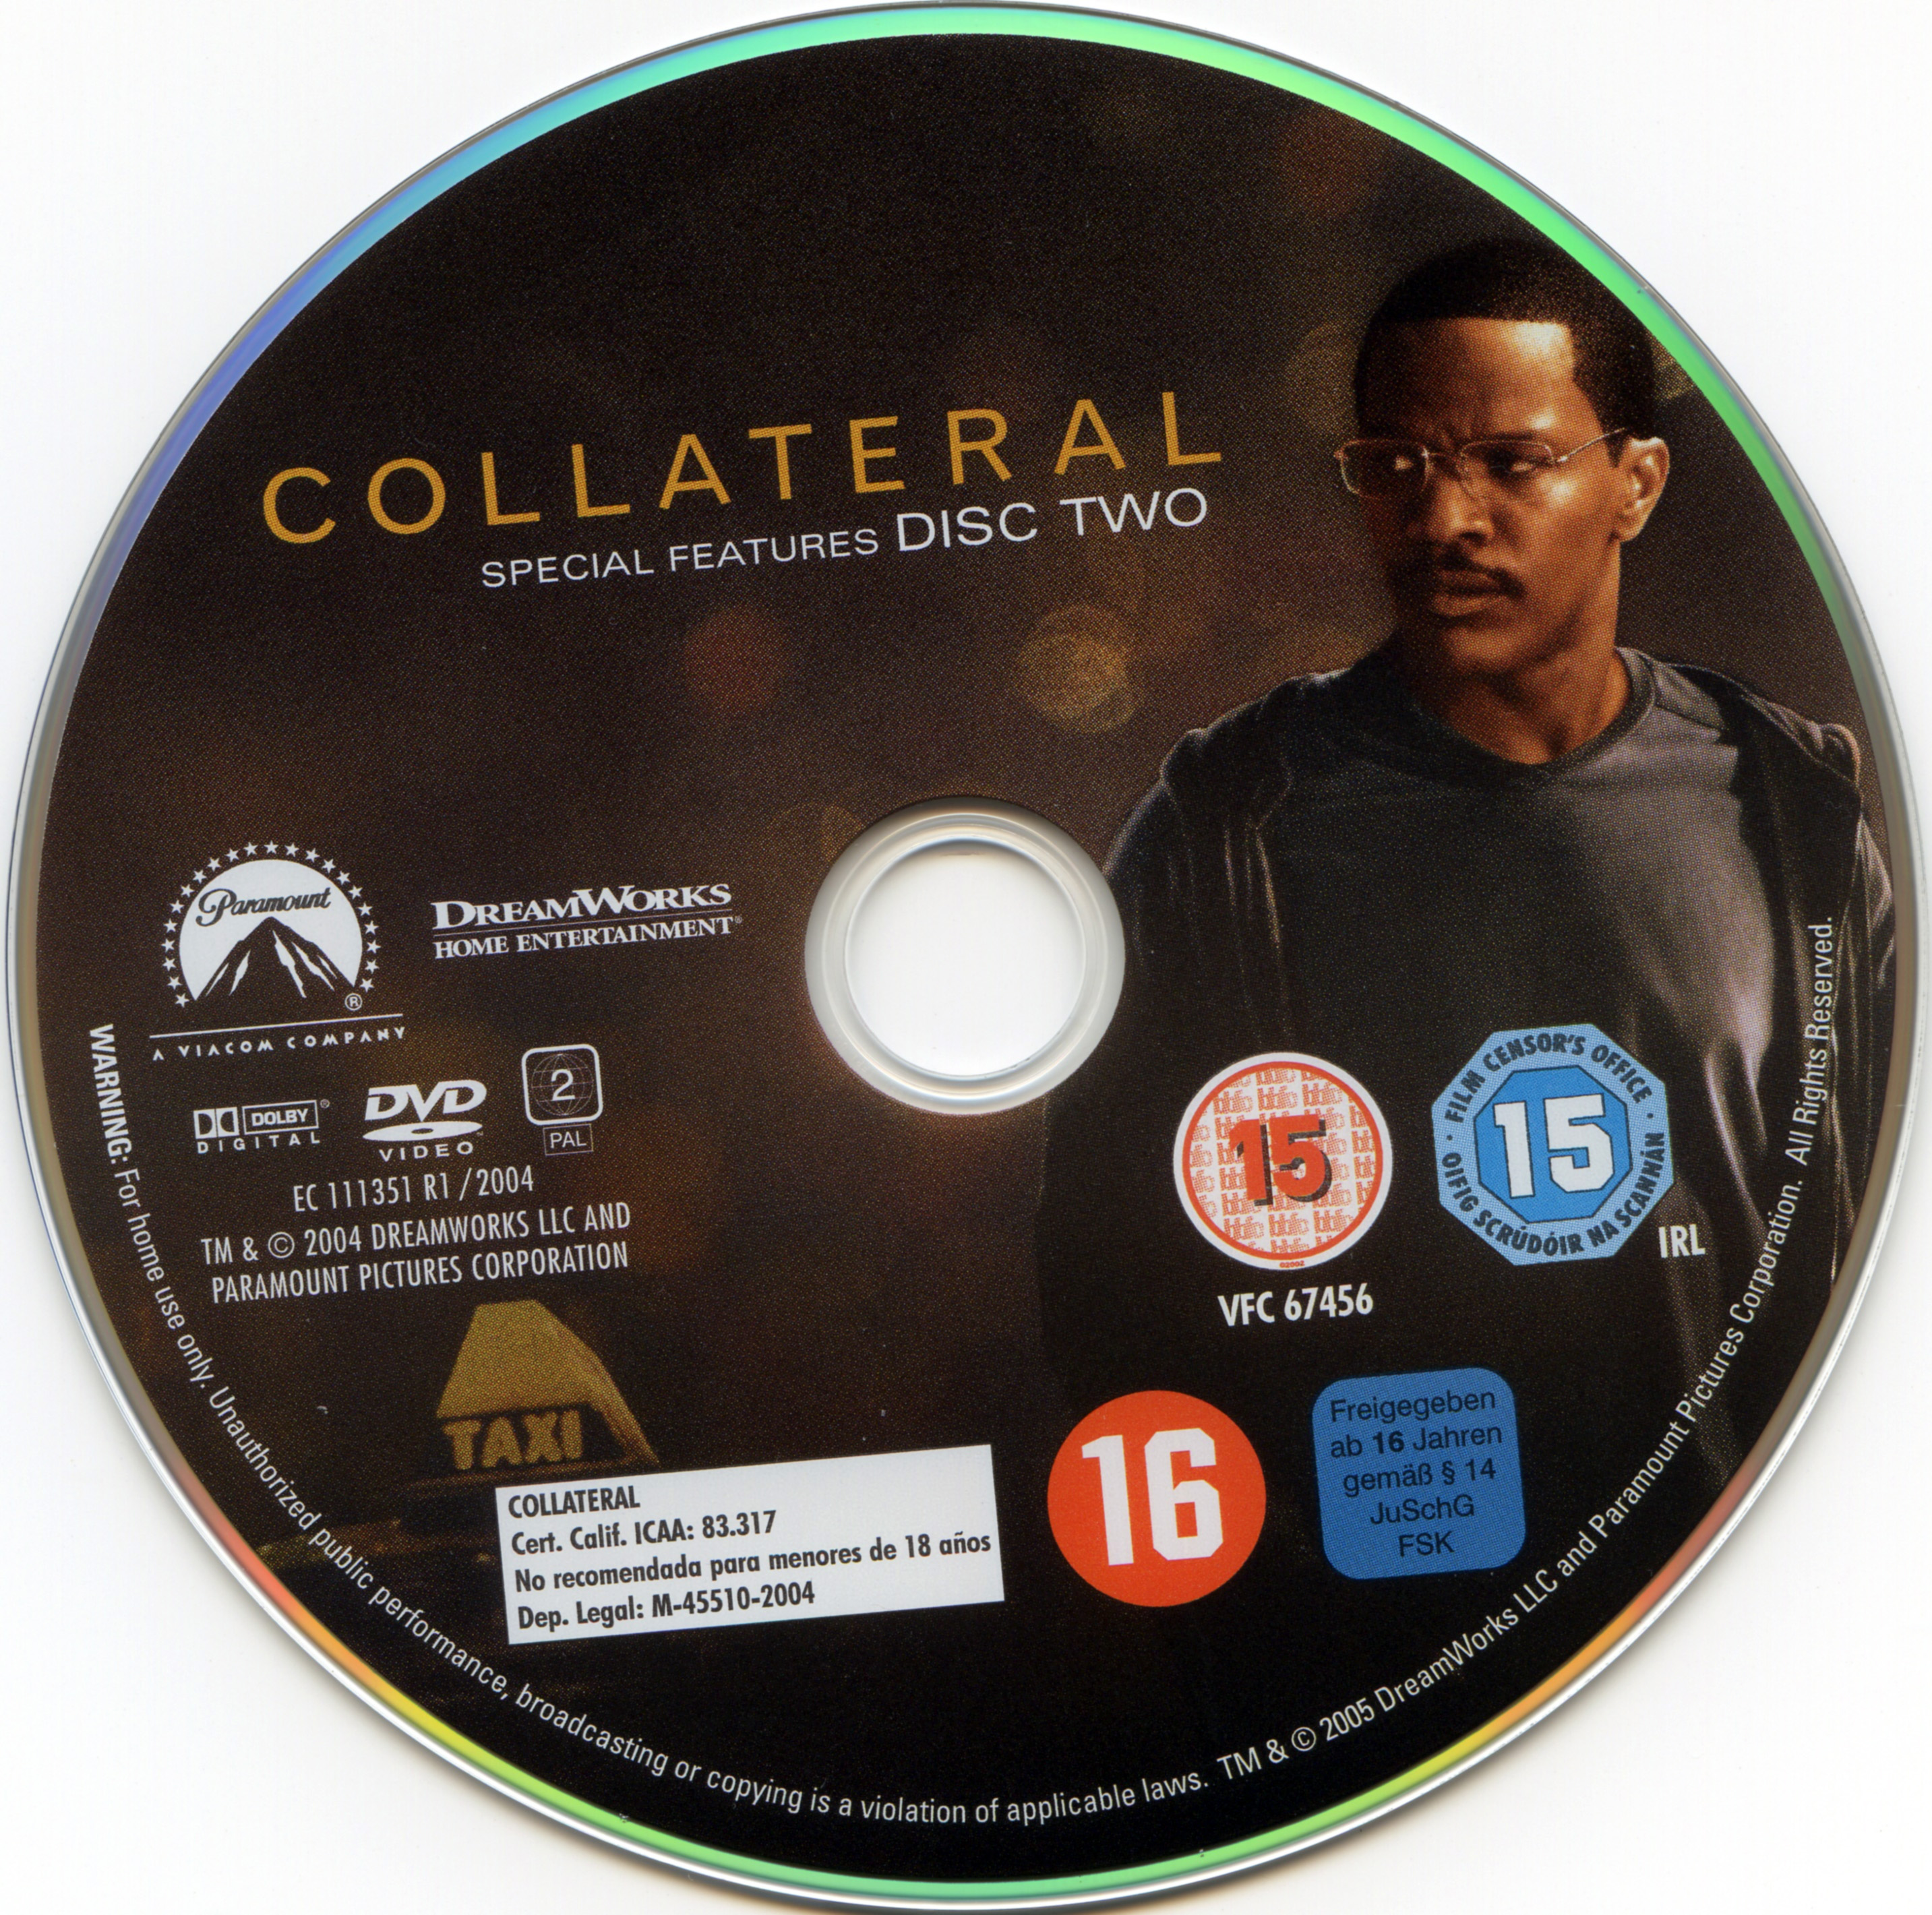 Collateral DISC 2